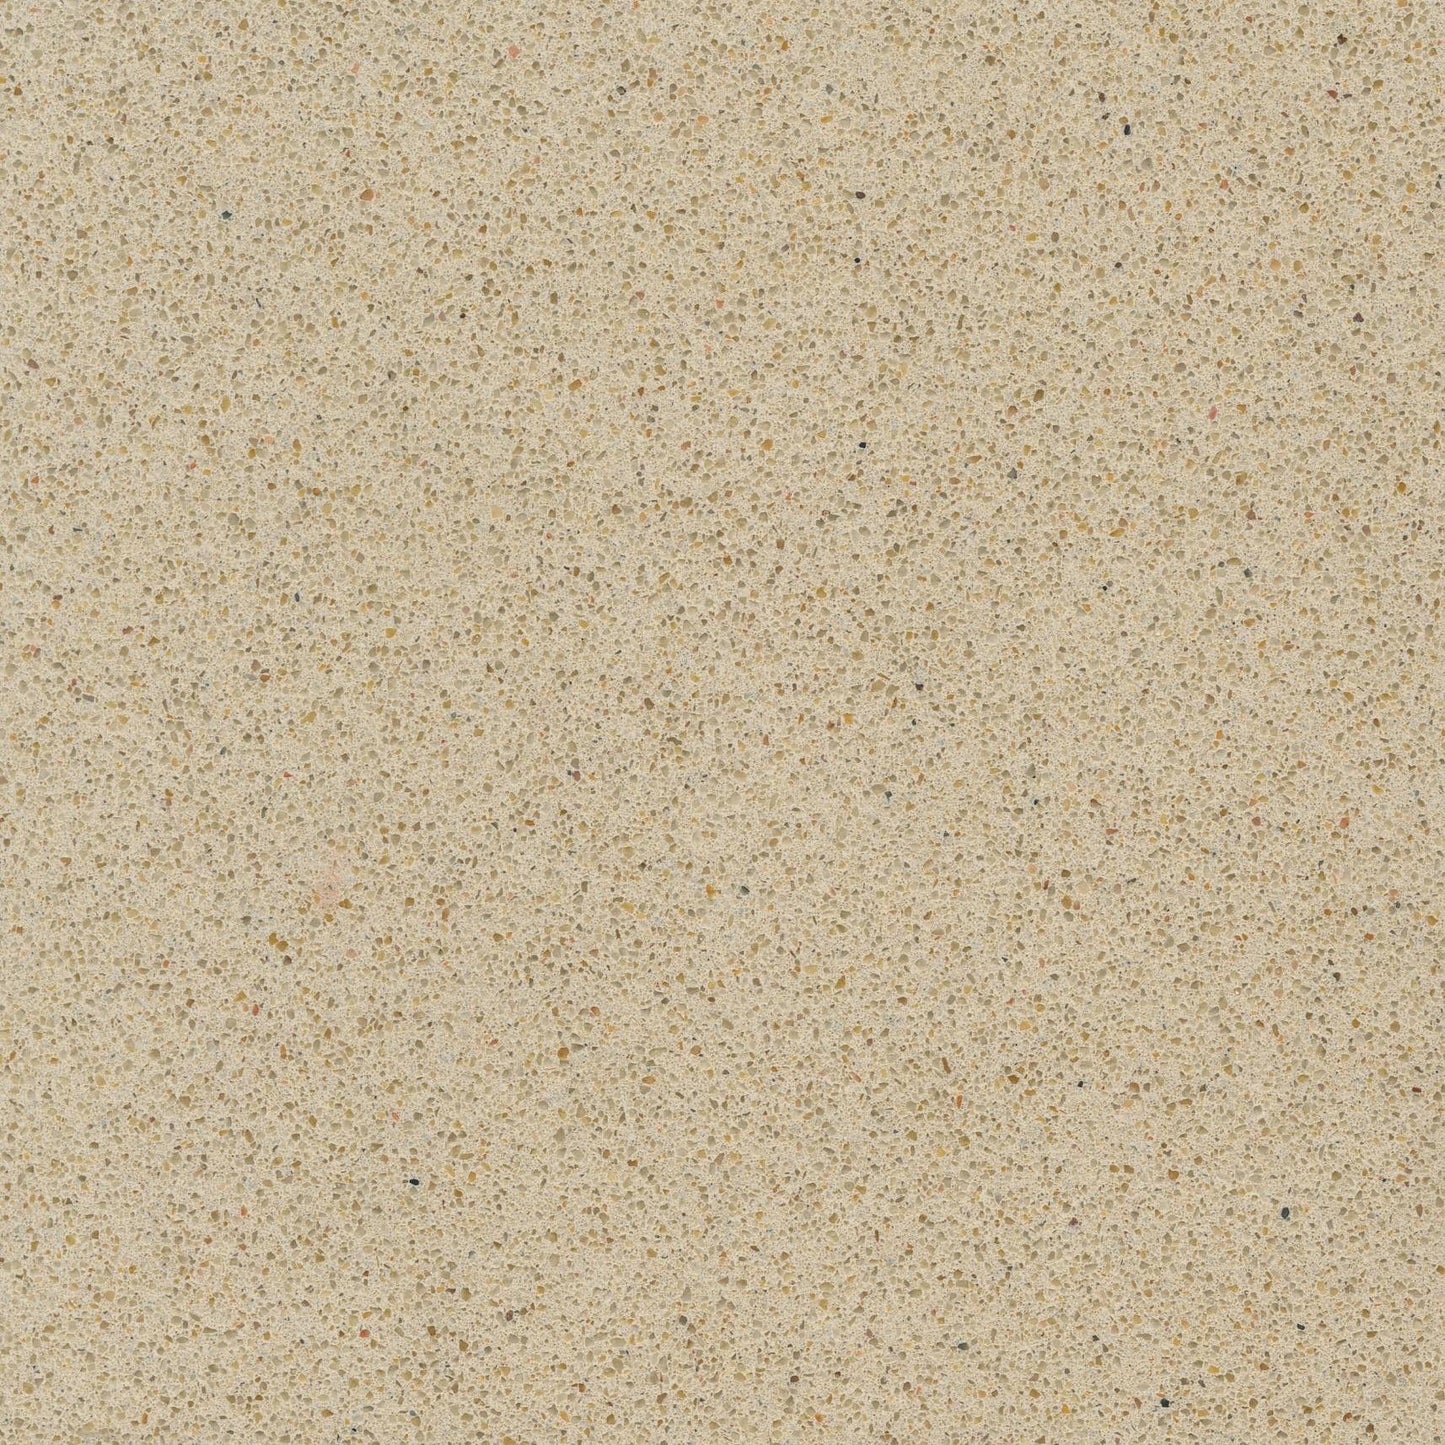 Minerva Cream, Quartz Stone Surface Material - Outlet stock from Cosentino.